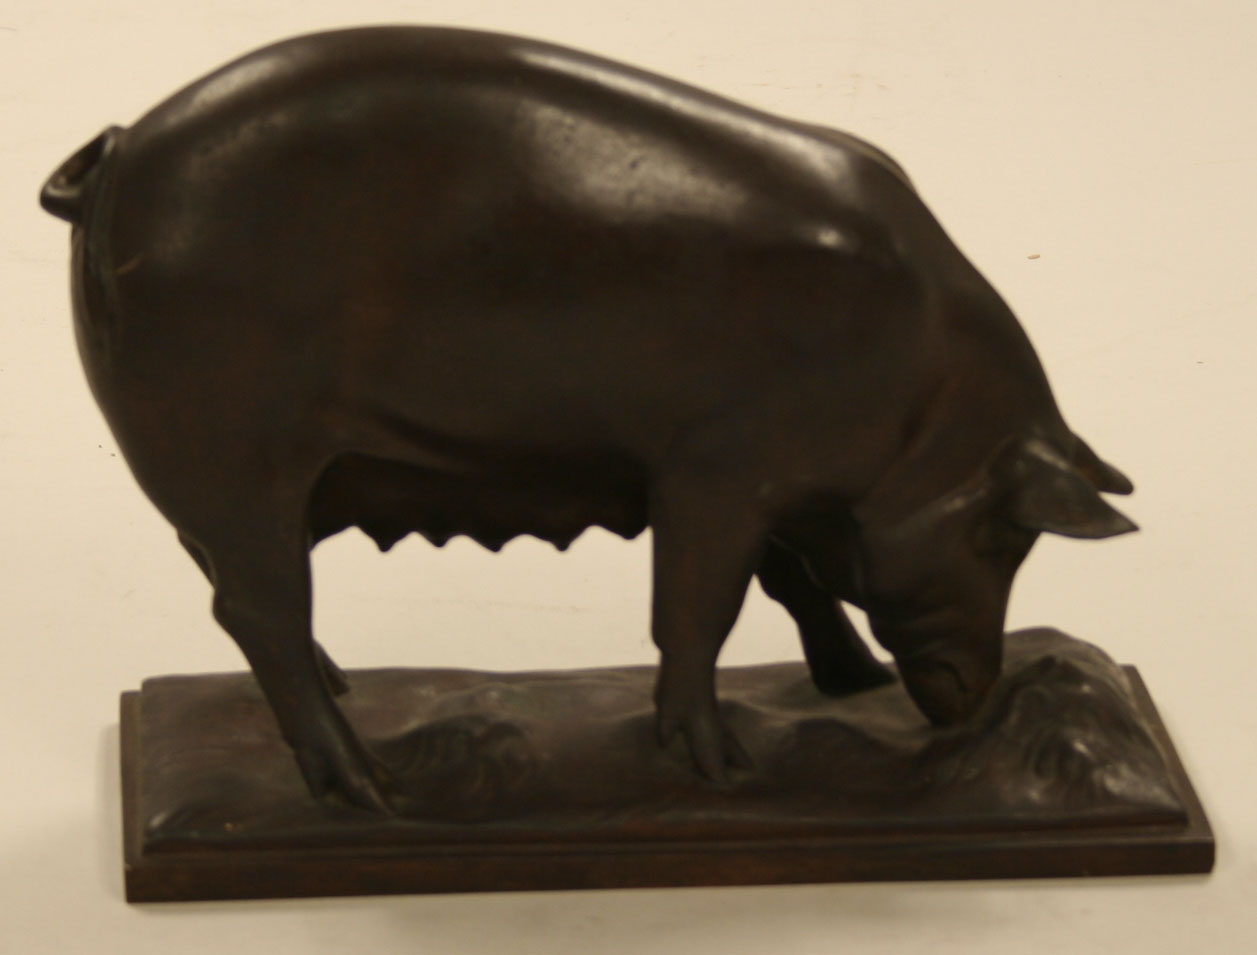 Harry Wickey, (American, 1892-1968), <i>Sow</i>, 1941, bronze. Museums Collections, Gift of Mrs. John Sloan